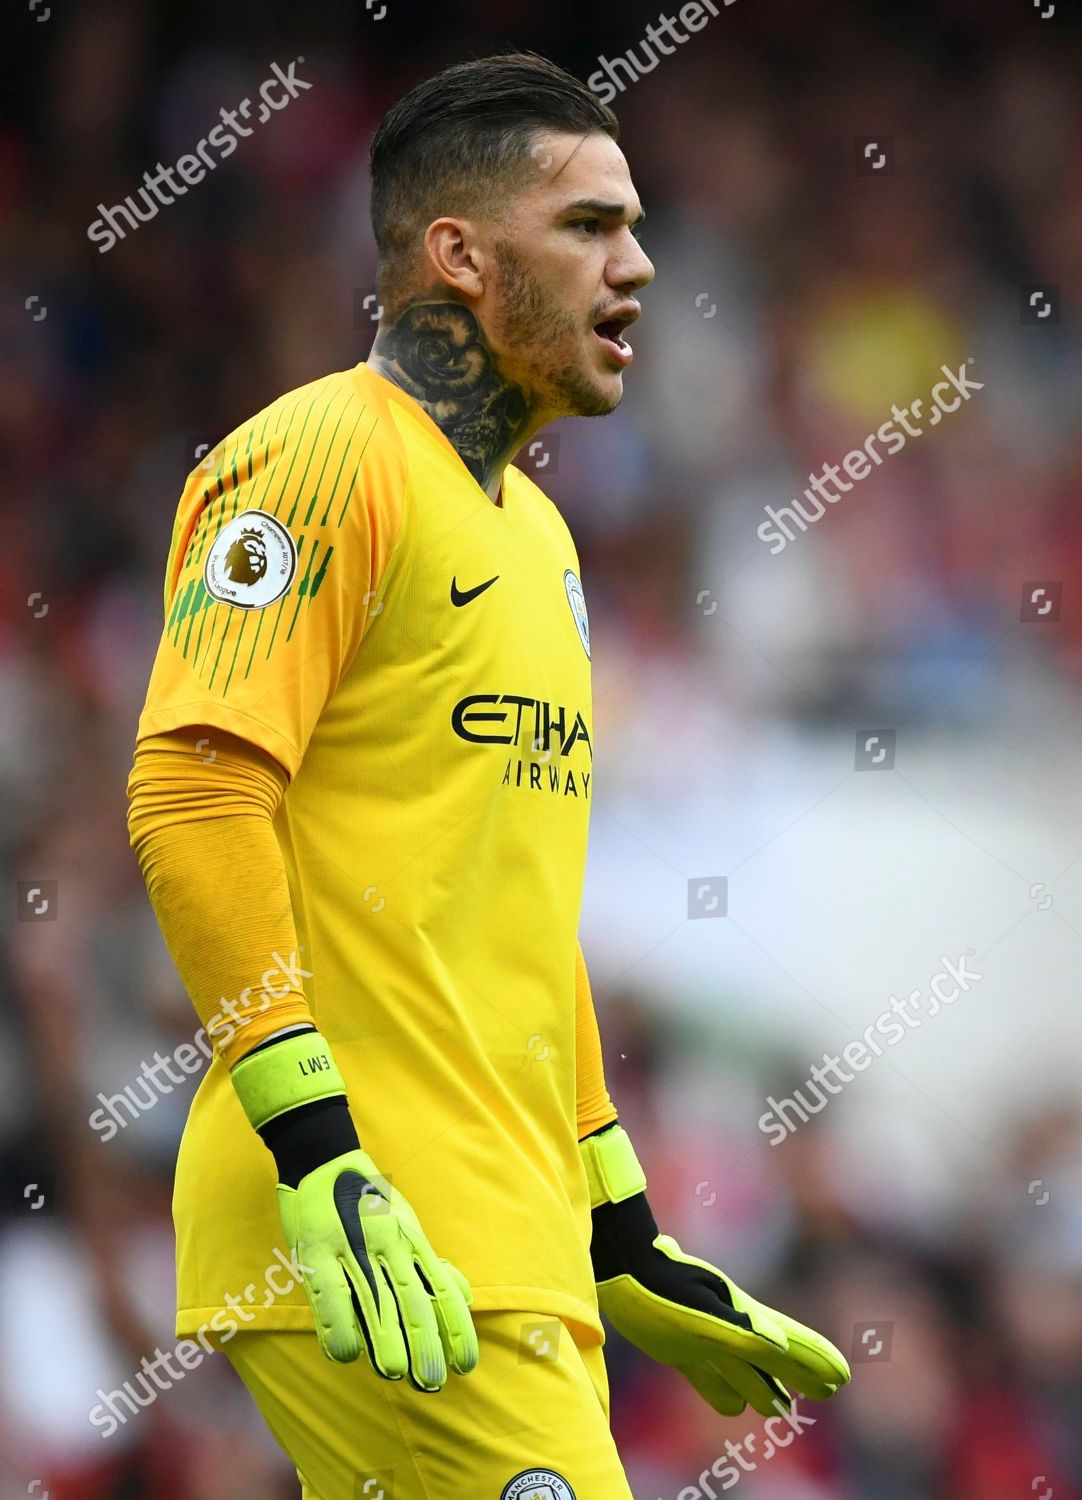 Brendan Dunlop  35 million is a lot But Ederson has grown as a  goalkeeper even more than that neck tattoo ManCity have themselves a  special player  Facebook